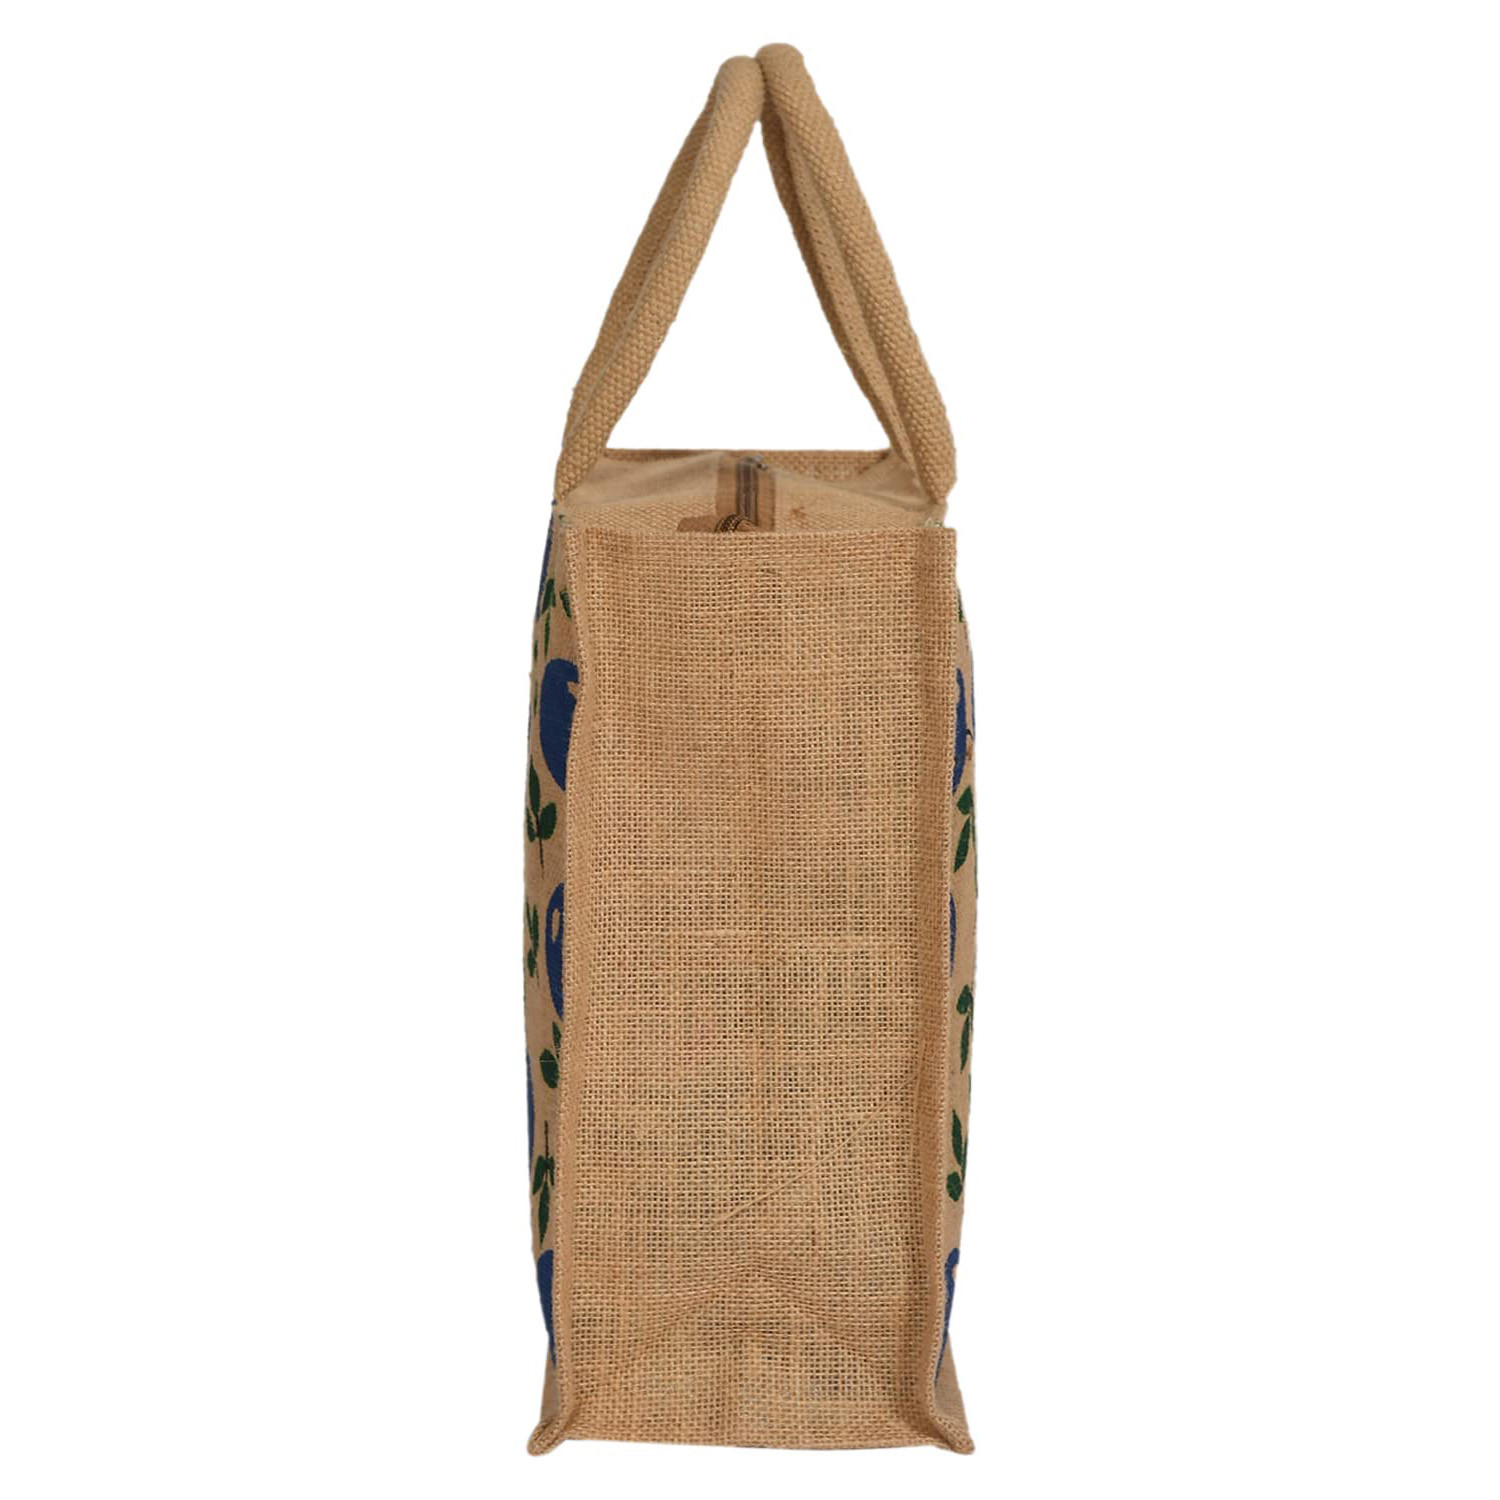 Kuber Industries Shopping Bag|Jute Eco-Friendly & Reusable Grocery Bag|Hand Bag With Zip & Handle for Daily Use|(Brown)